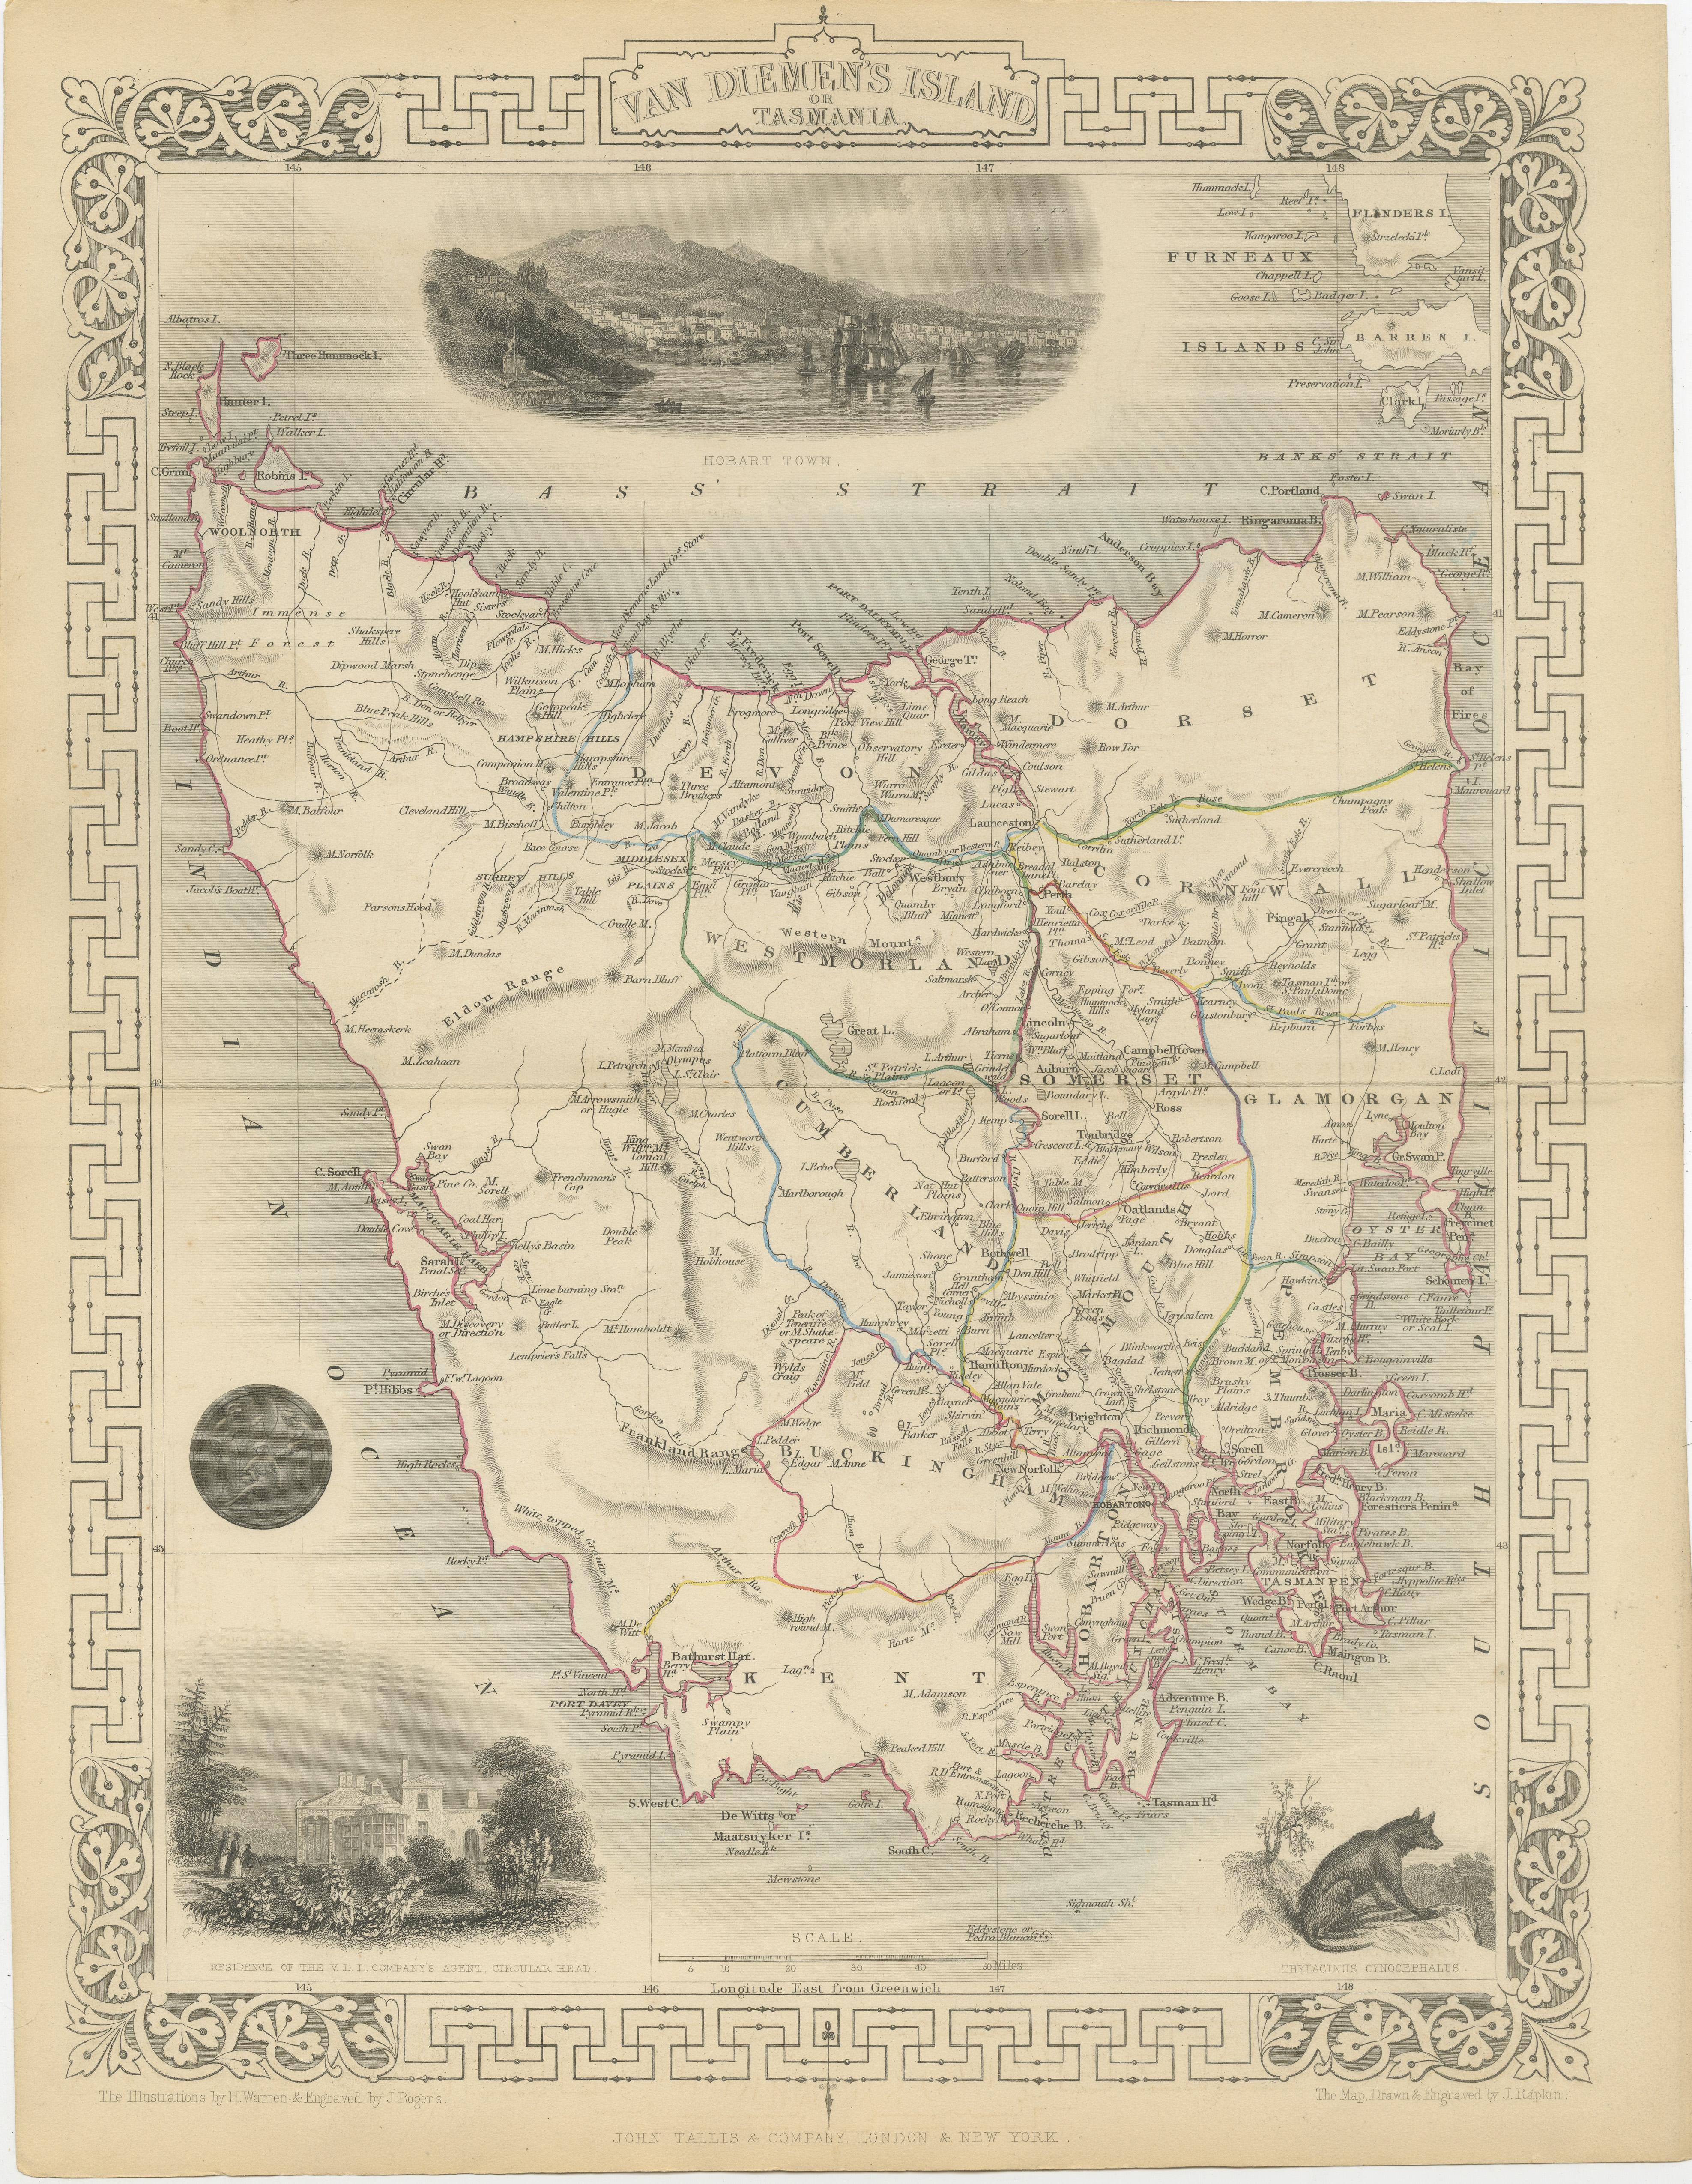 Paper Map of Tasmania with Illustrations of Local Fauna and Colonial Landmarks, 1851 For Sale